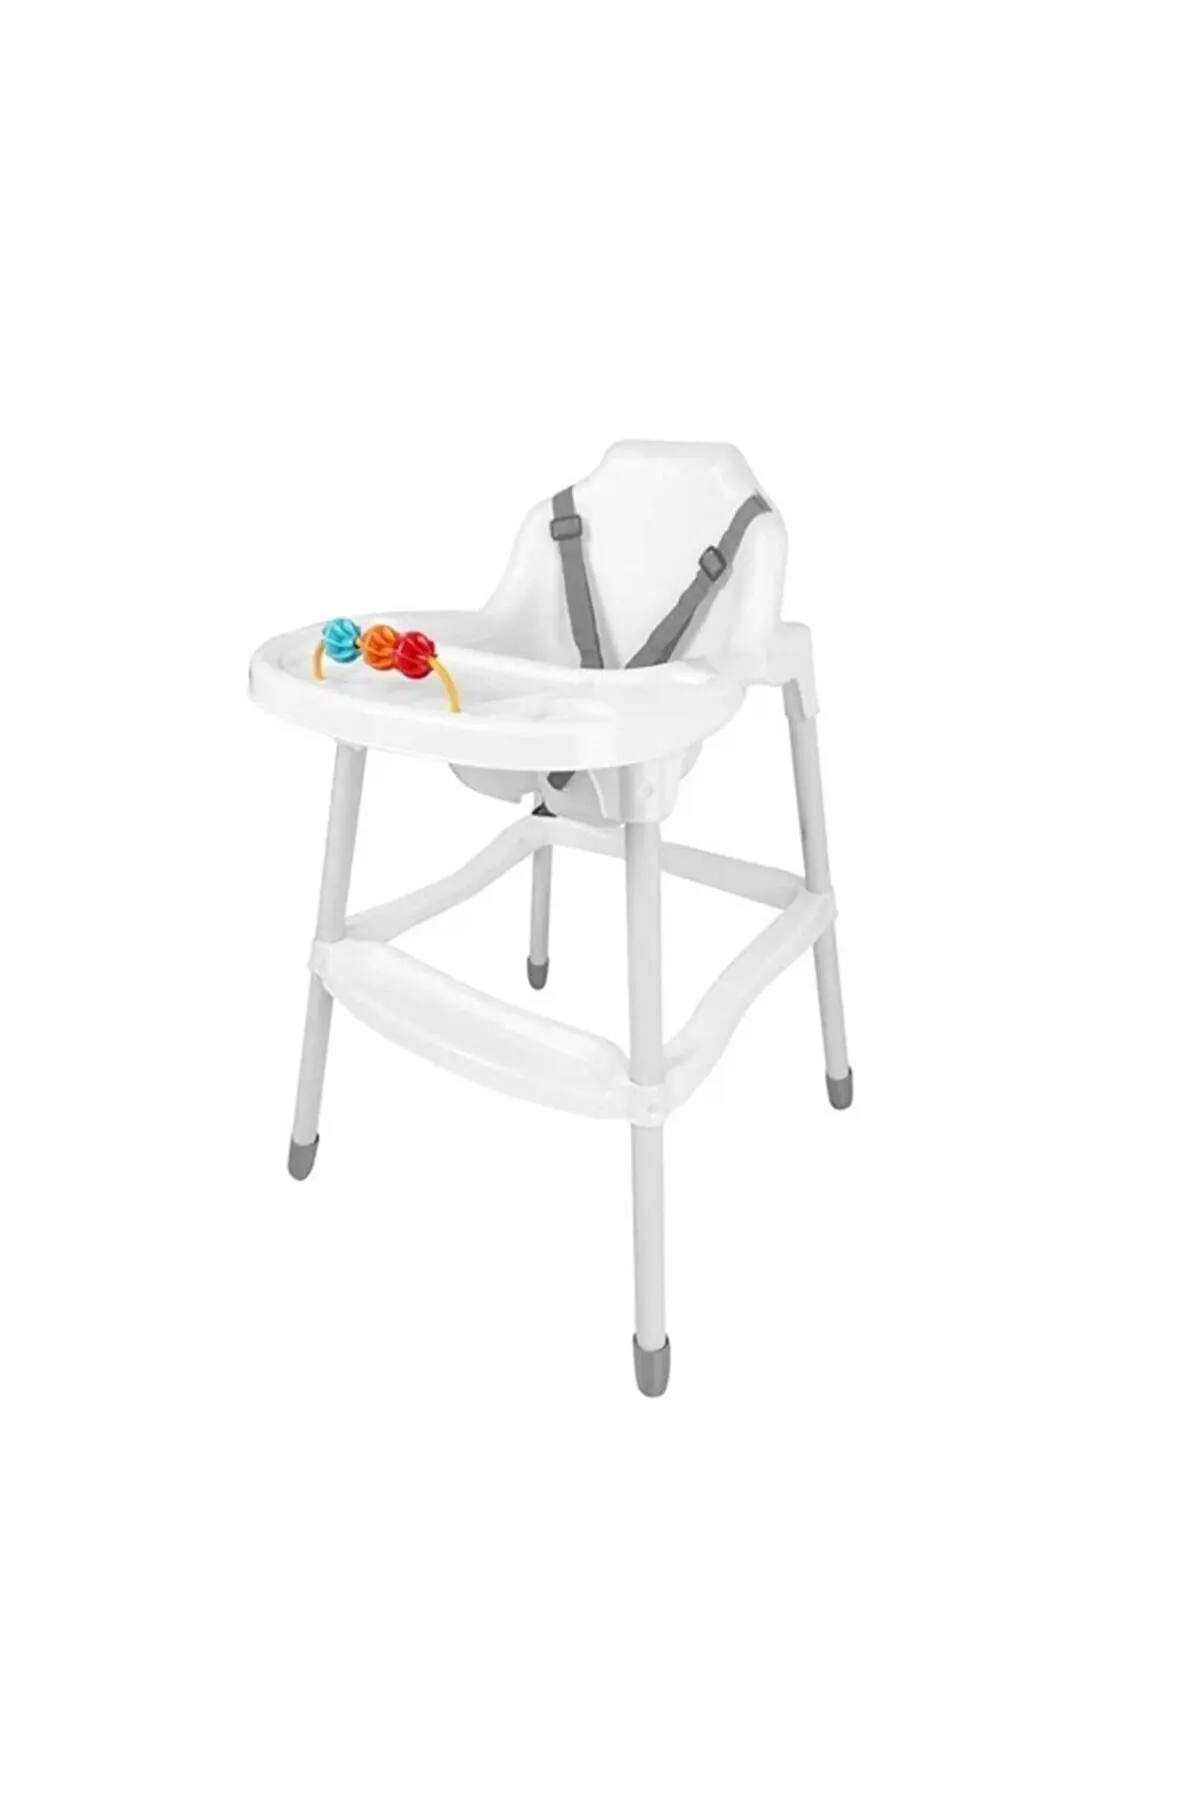 Footed Baby High Chair  Seat Belt Slippery Surfaces Anti Slip System Mom Mother Kids Healthy Family